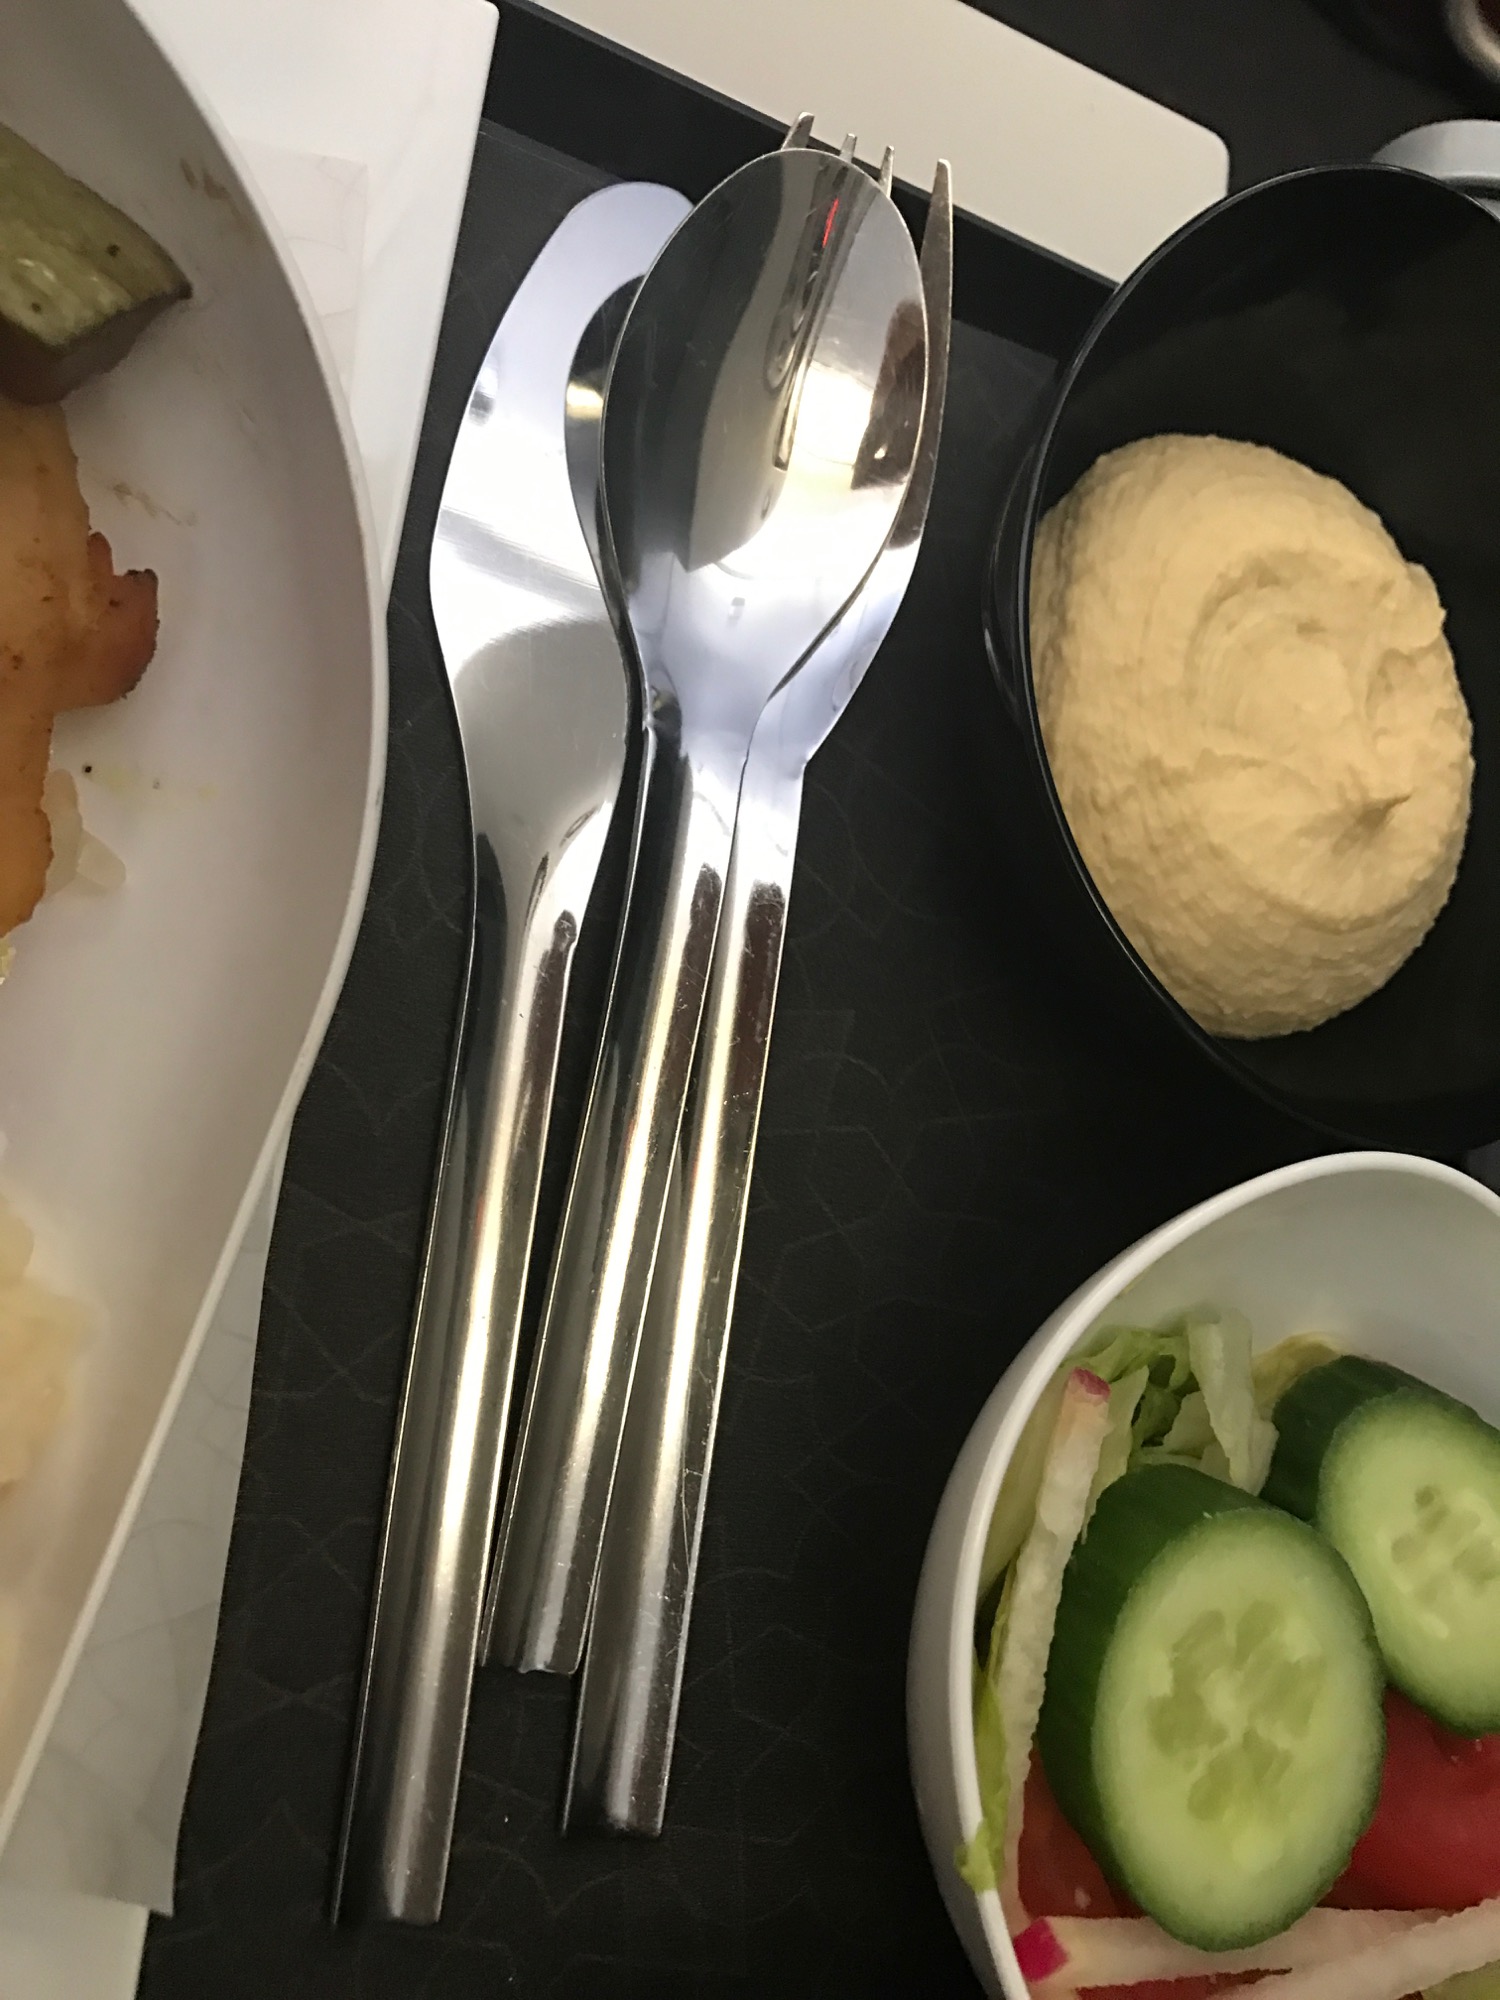 Turkish Airlines Economy Class Meals - 7